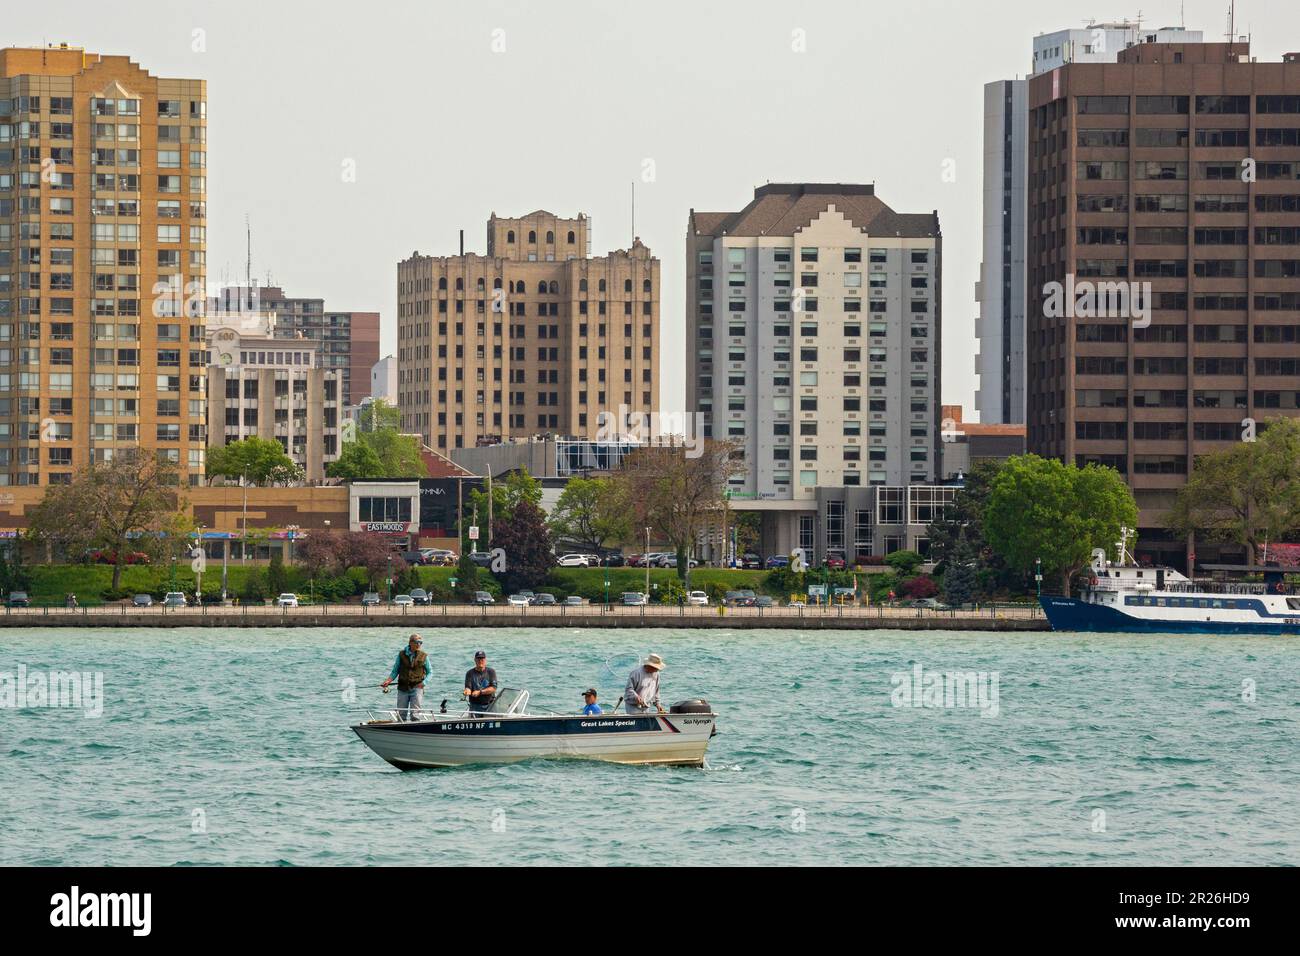 Detroit, Michigan - Four men fishing from a small boat on the Detroit River, which forms the border between the United States and Canada. In the backg Stock Photo